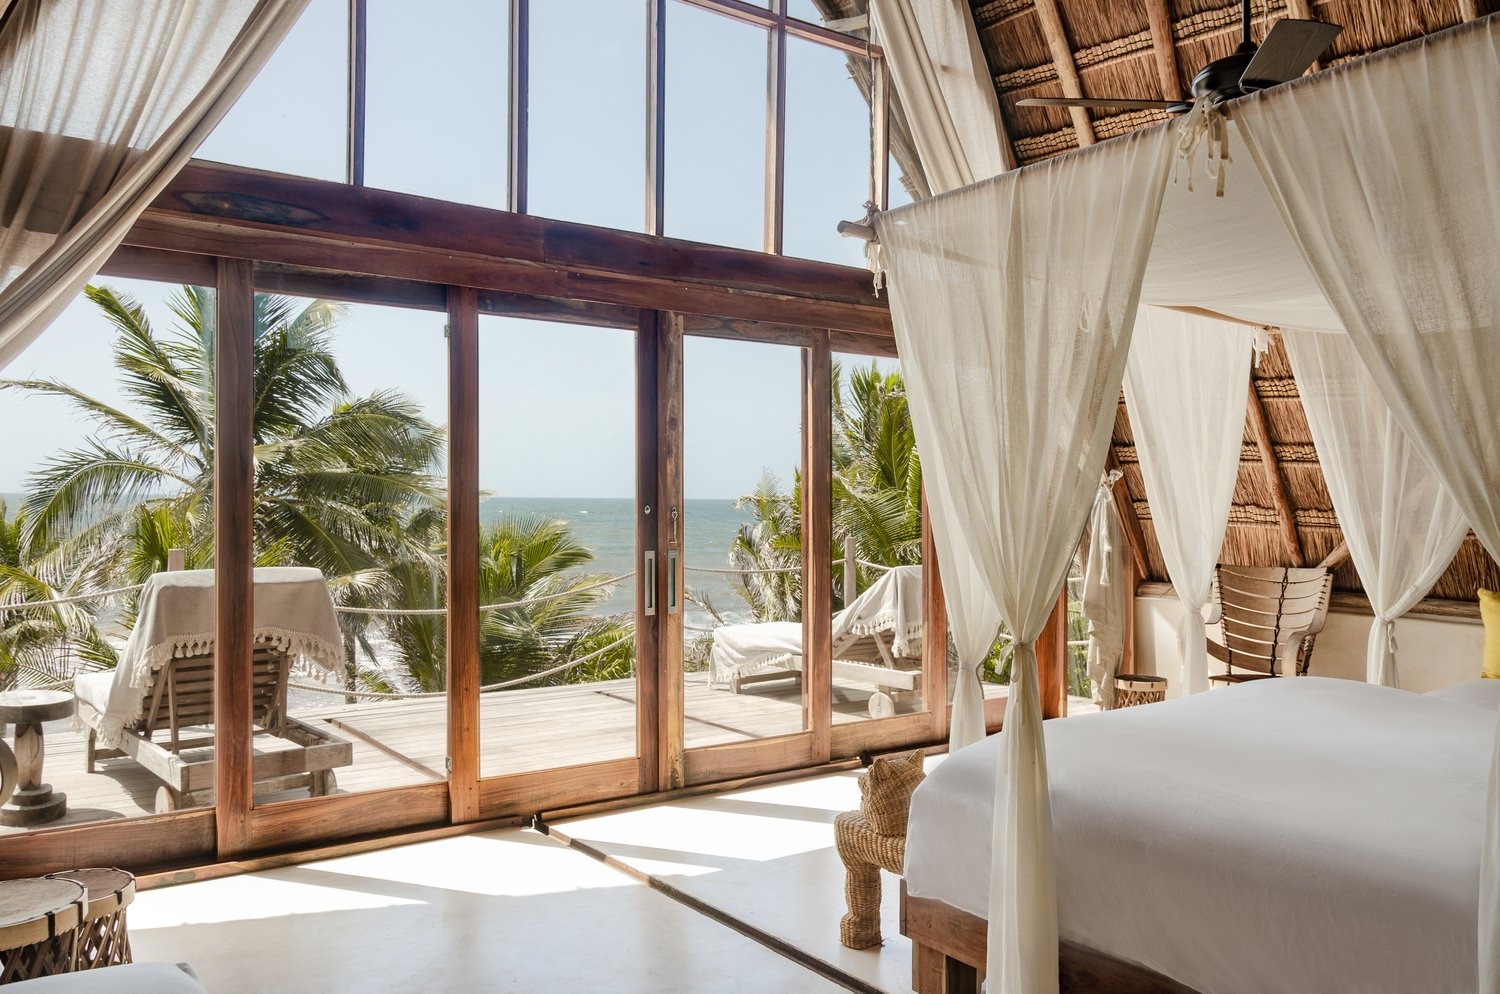 5 hotels in tulum that may interest you